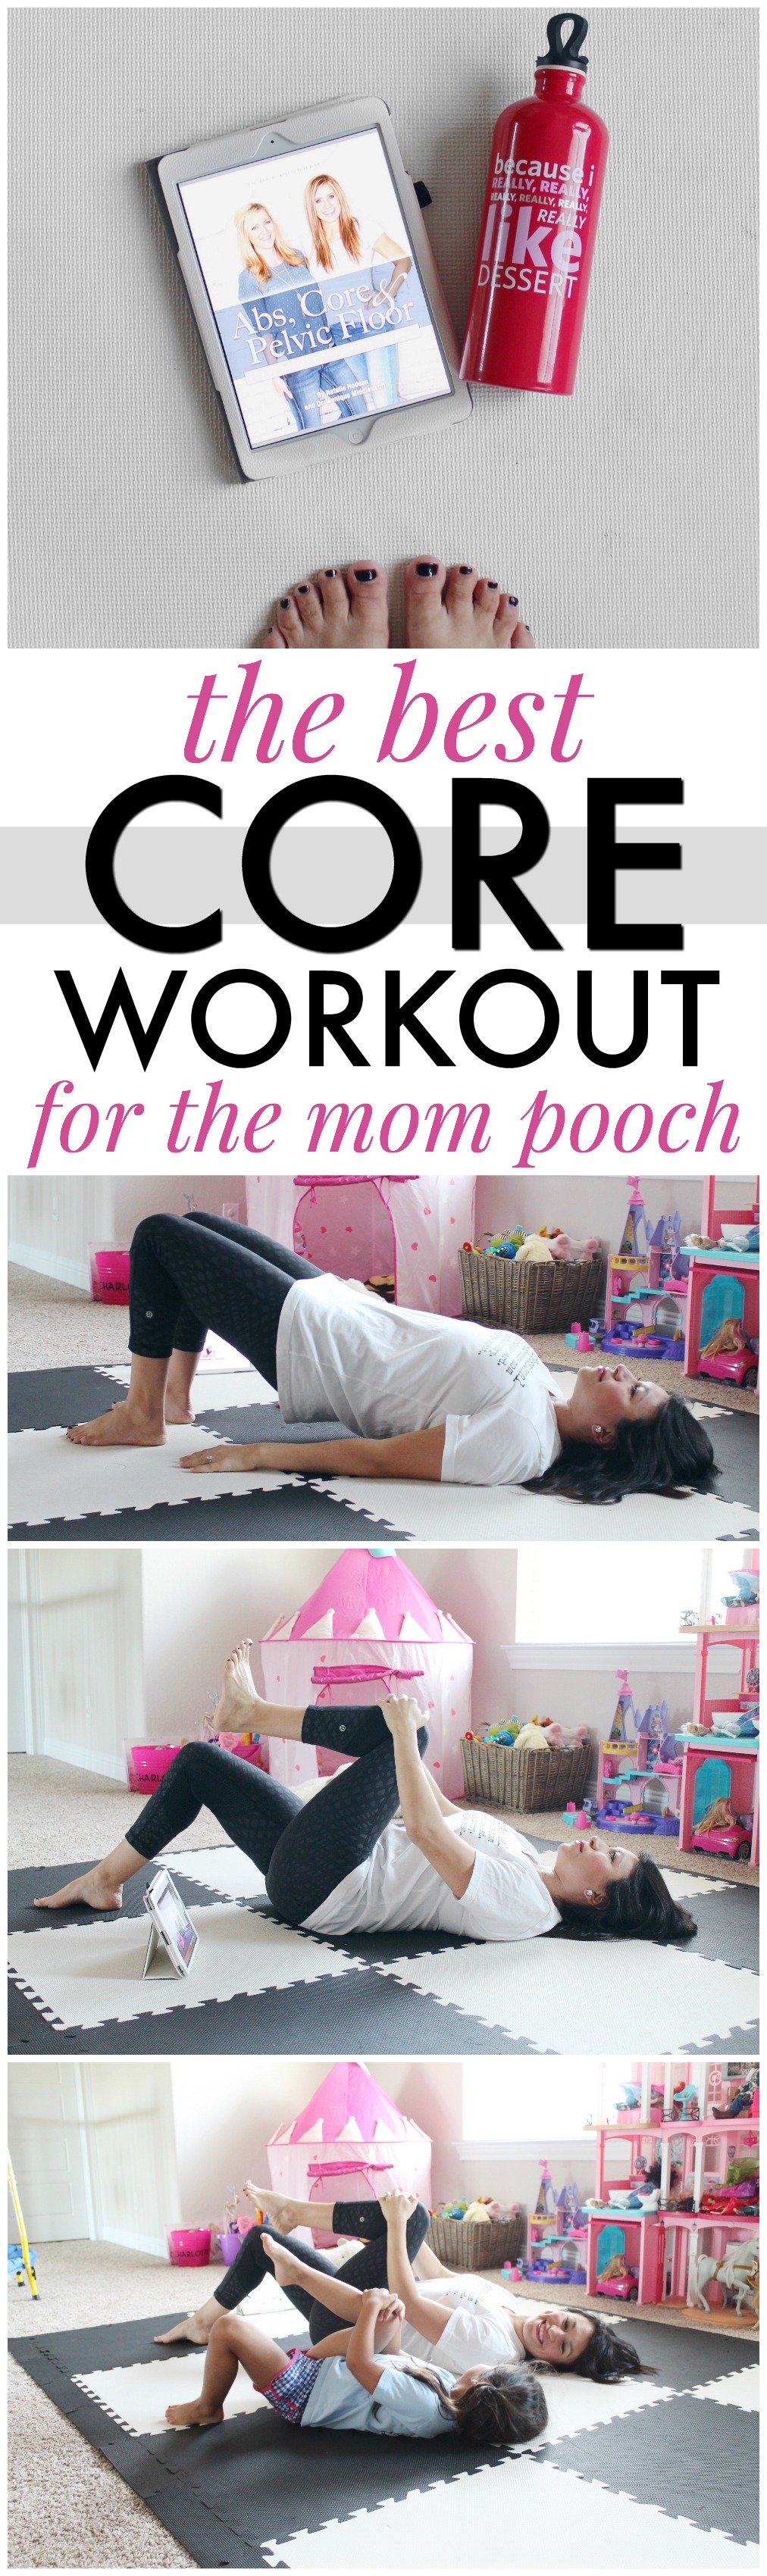 Working on My Mommy Fitness: The Best Core Workout for Mommy Pooch